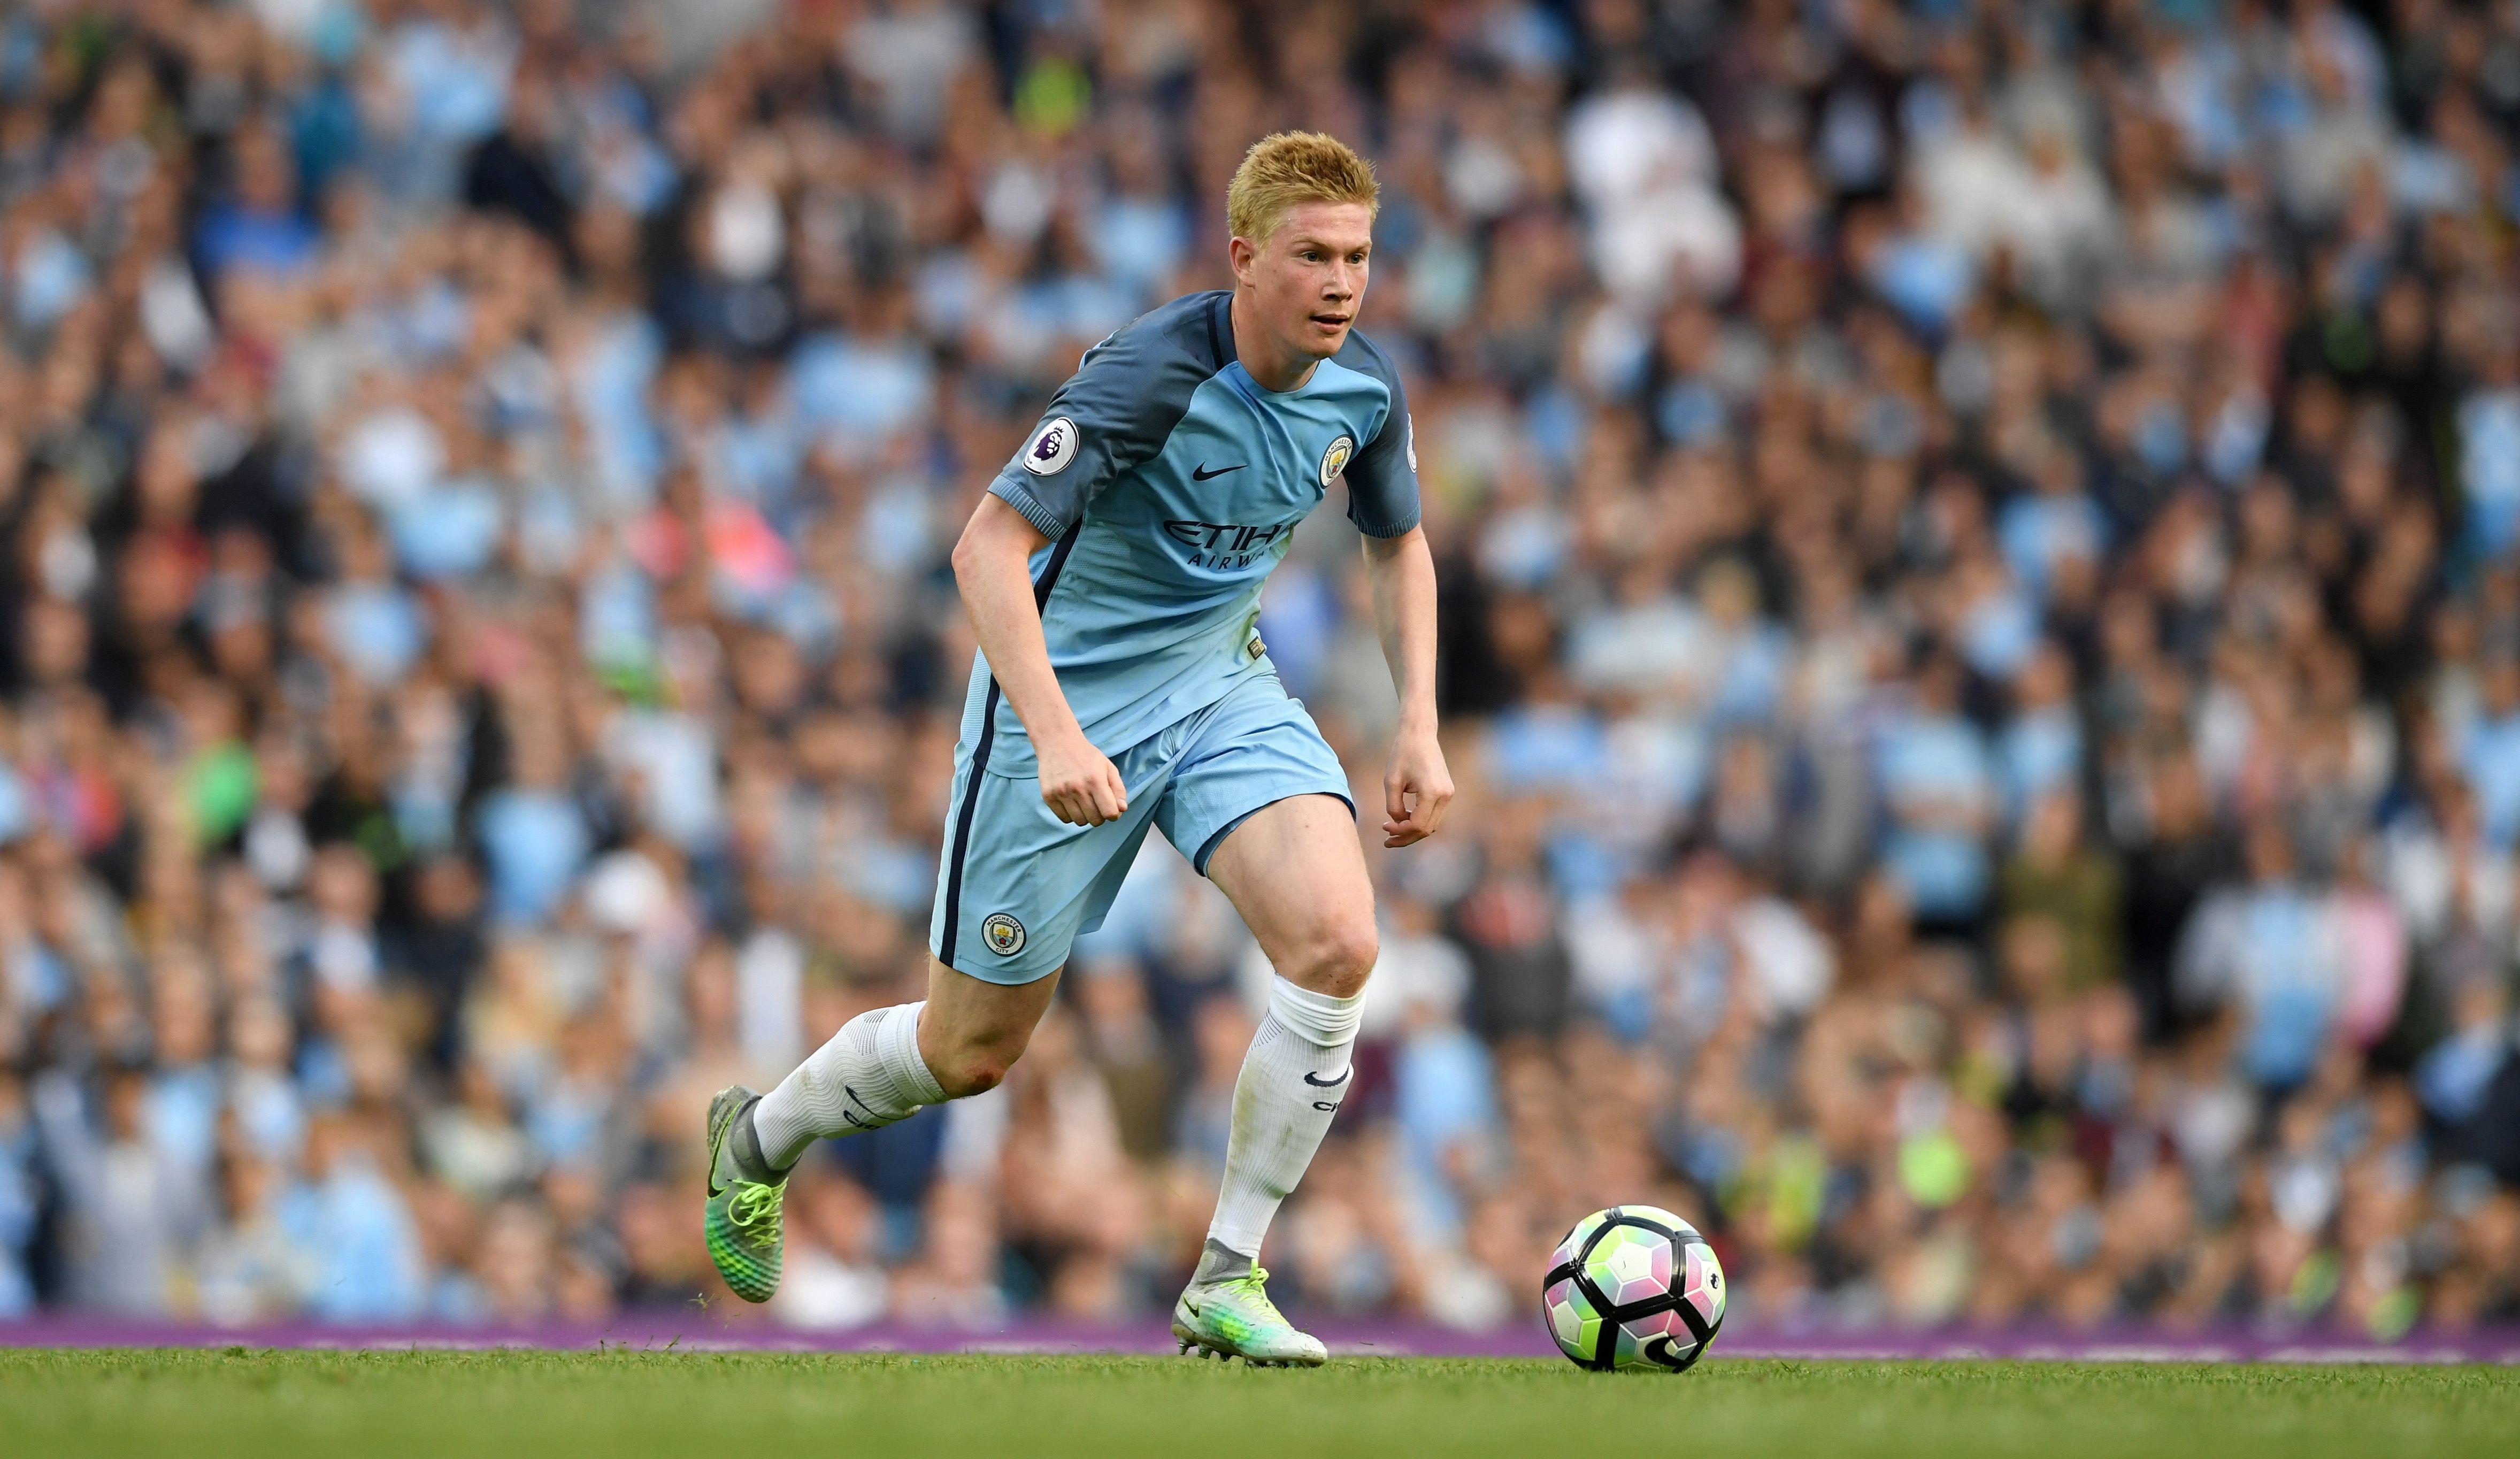 Kevin de Bruyne Wallpaper Image Photo Picture Background